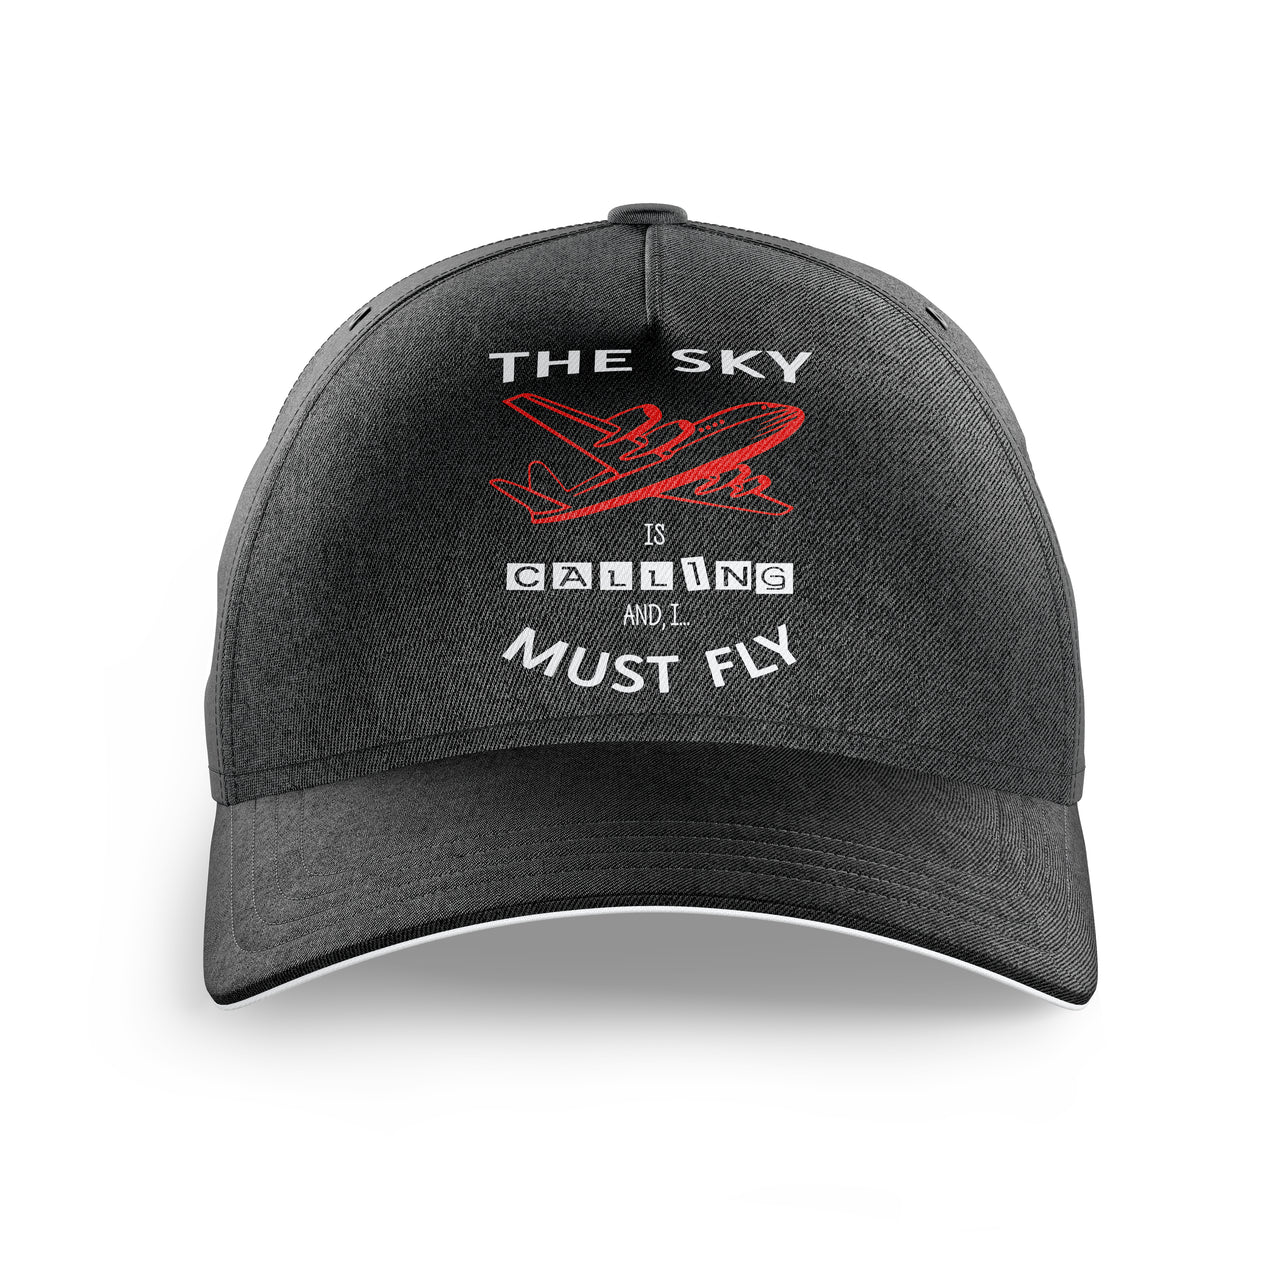 The Sky is Calling and I Must Fly Printed Hats